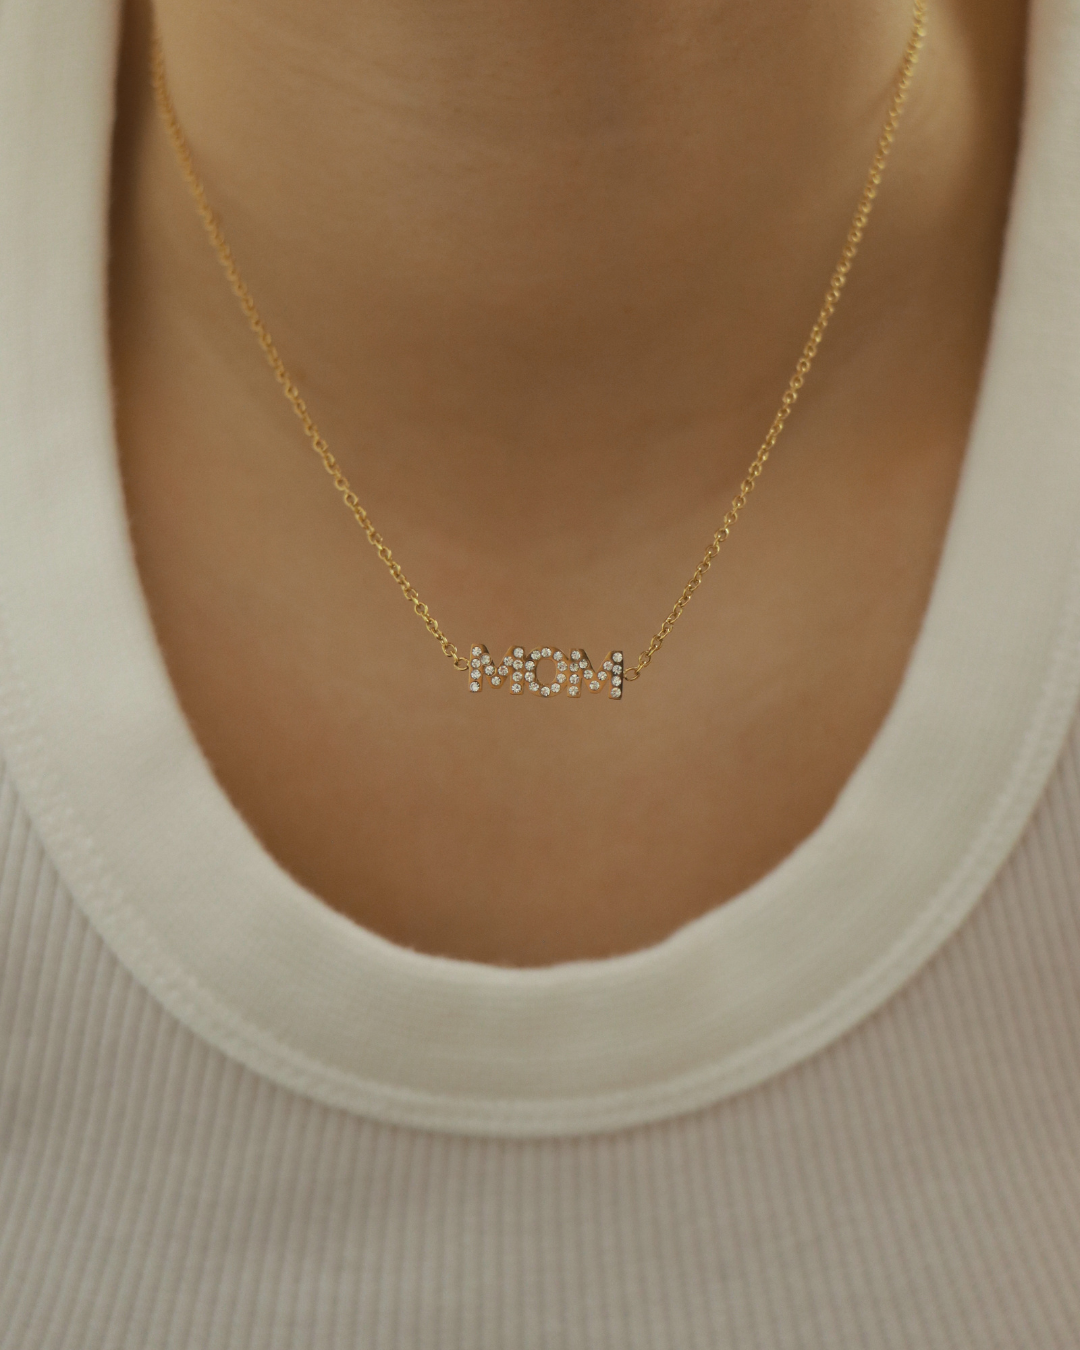 The Mom Nameplate Necklace